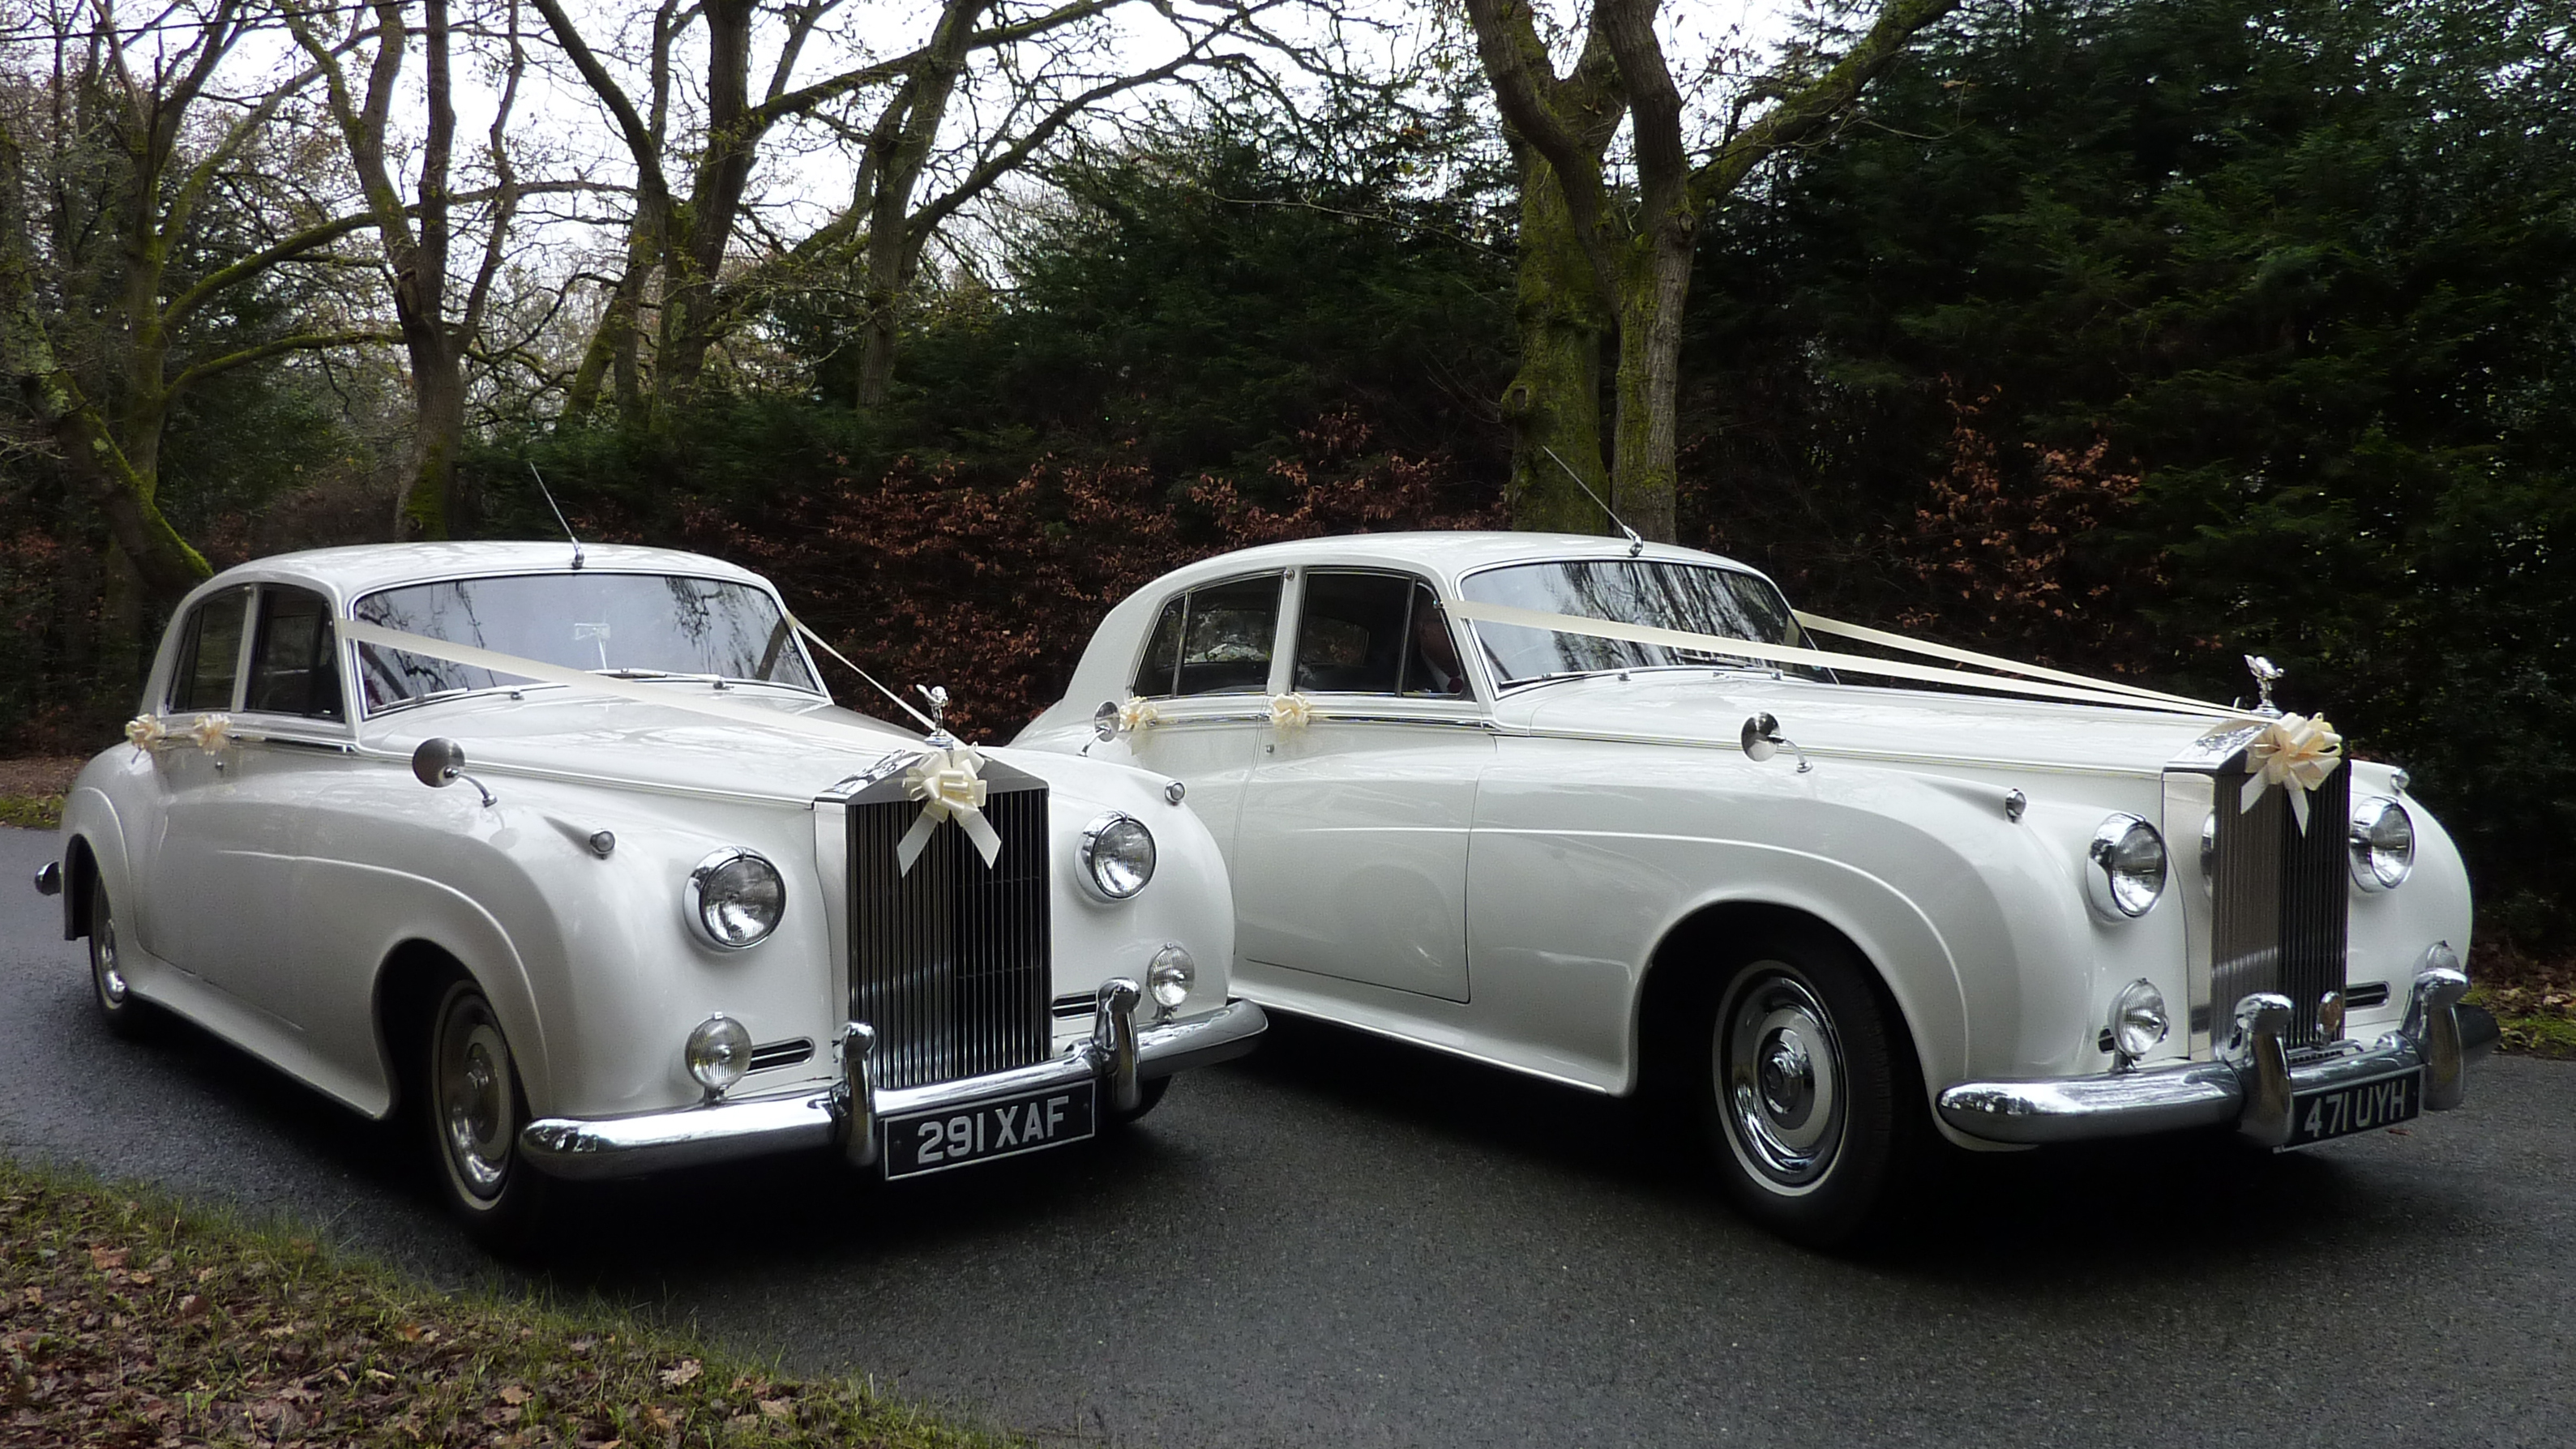 Two matching classic Rolls-Royce Silver Cloud next to each others decorated with ivory ribbons and bows on top of the long chrome front radiator grill in an Autumn background in th